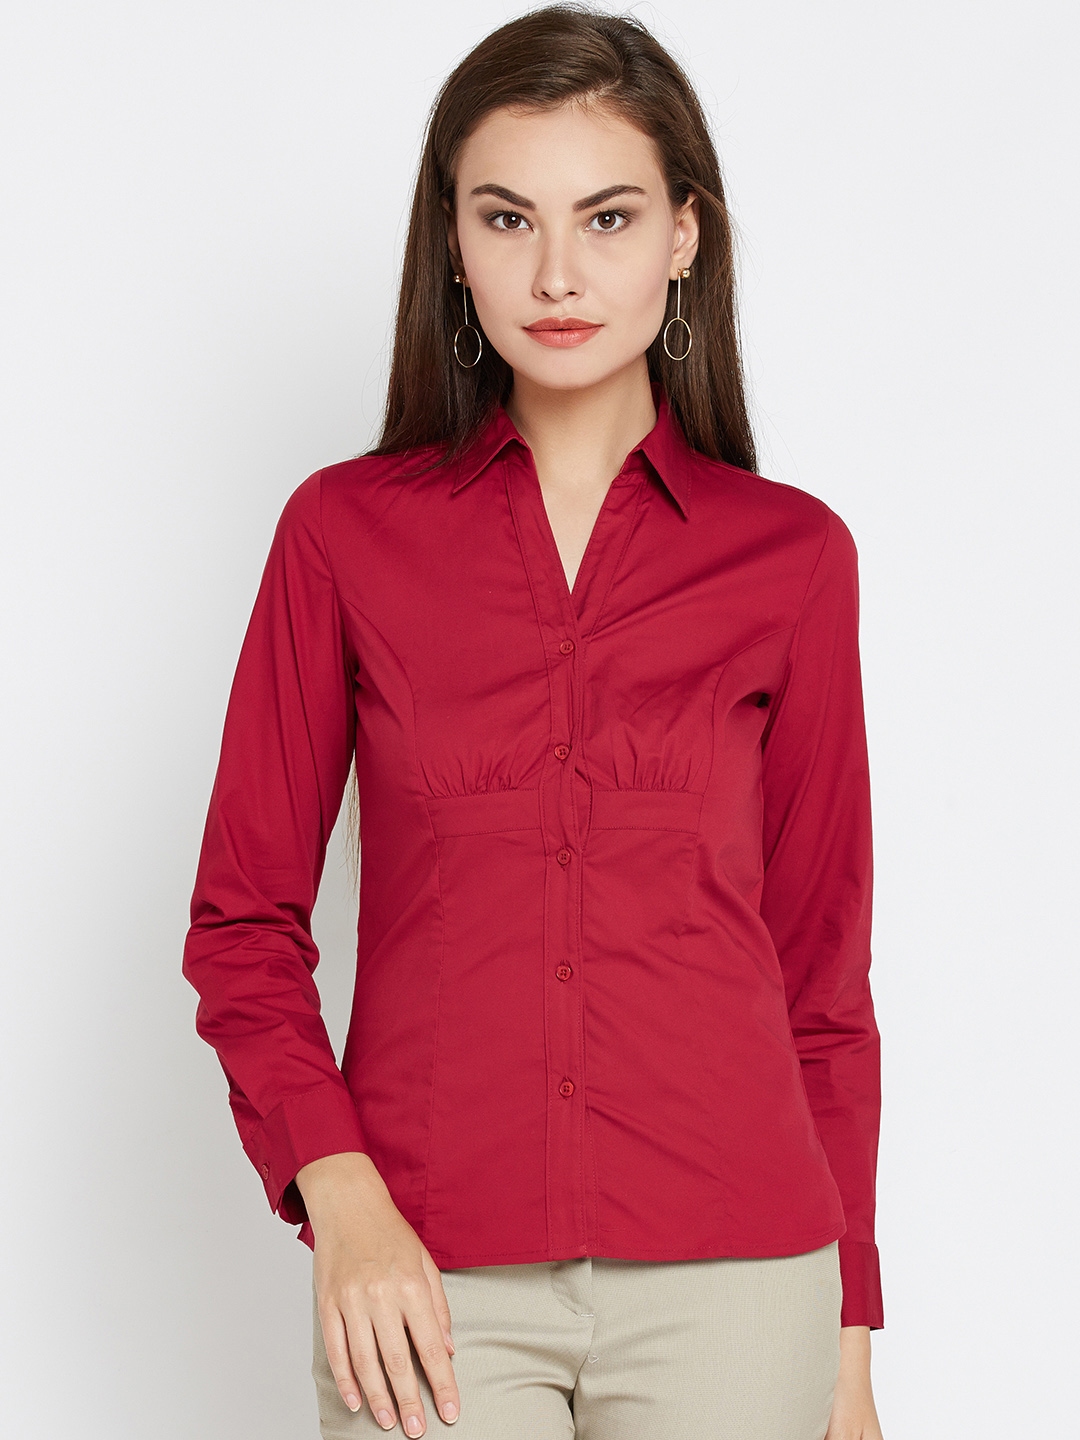 Buy Wills Lifestyle Women Red Solid Formal Shirt - Shirts for Women ...